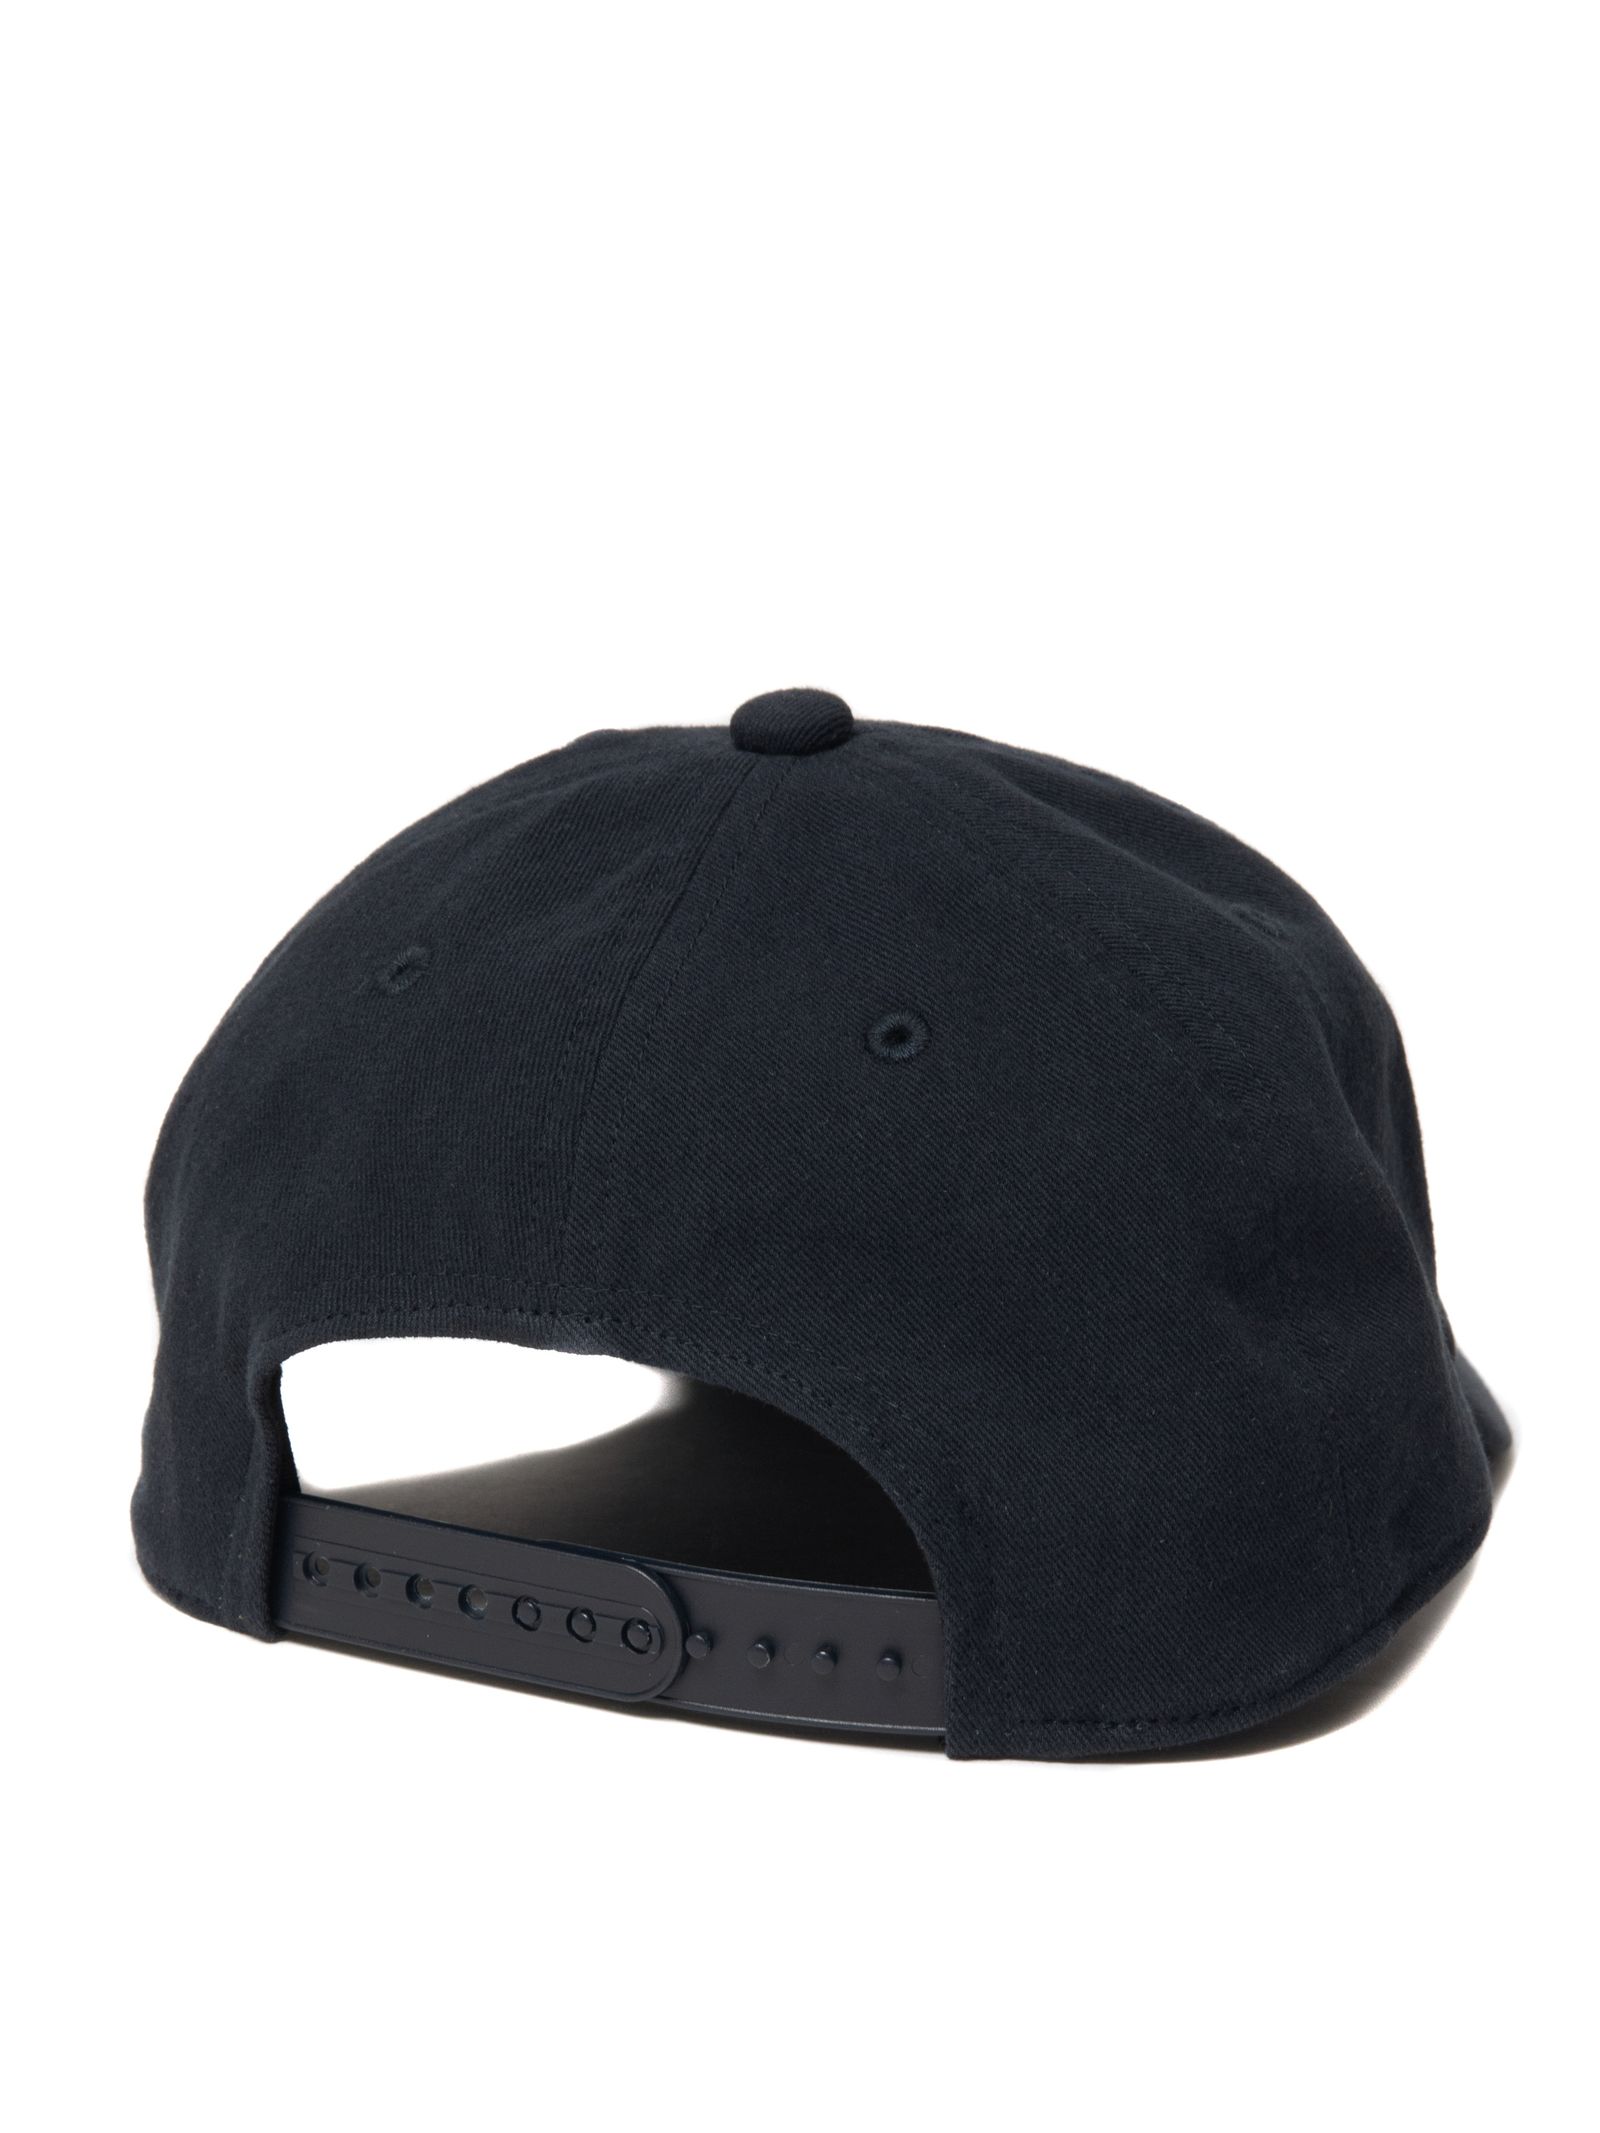 COOTIE PRODUCTIONS - Embroidery 6 Panel Cap (NAVY) / ロゴ